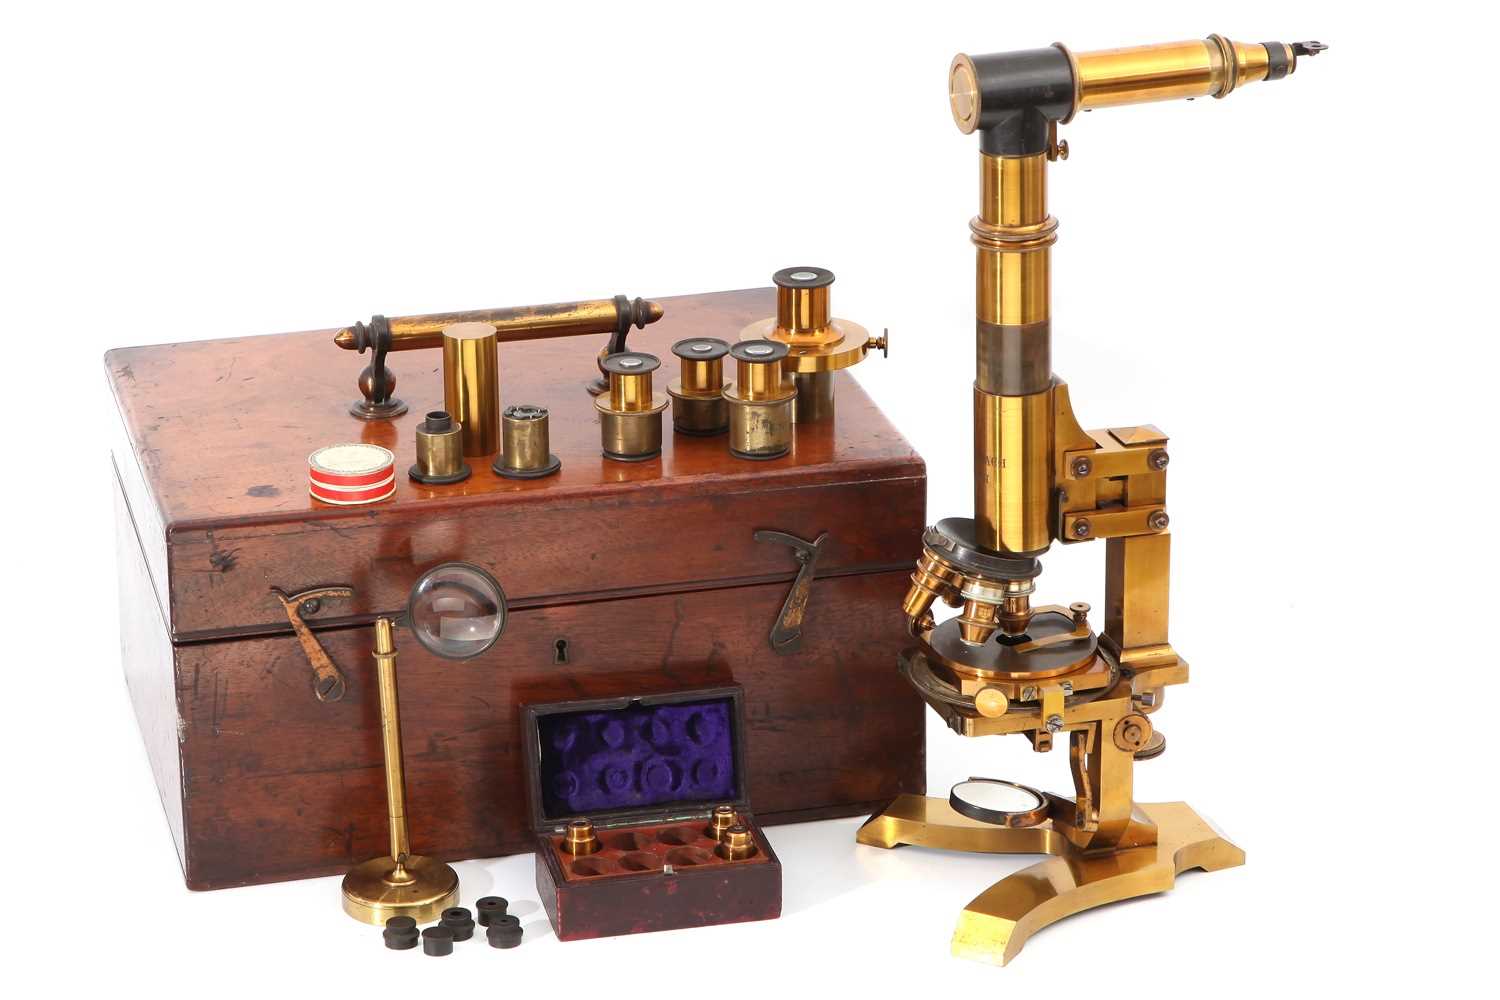 Lot 12 - A Large 19th Century German Compound Microscope Outfit